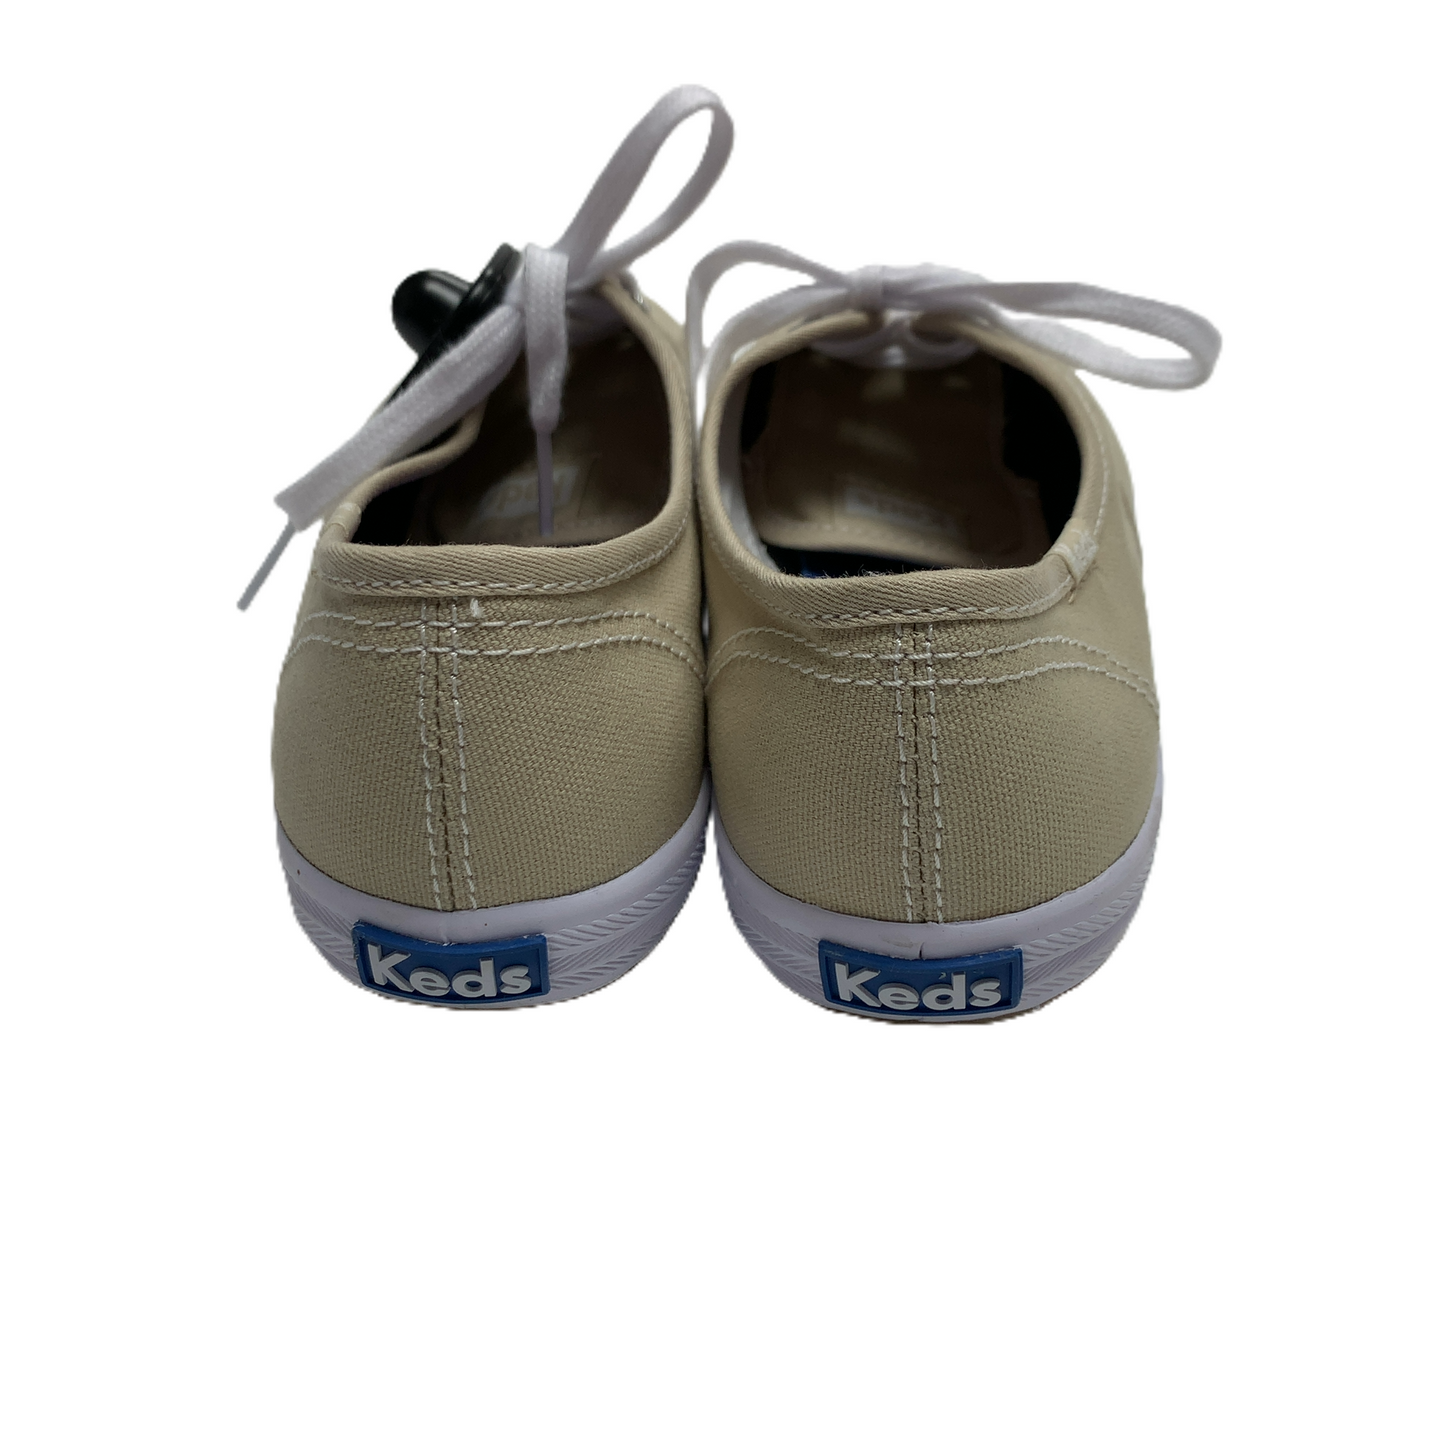 Shoes Flats By Keds  Size: 7.5